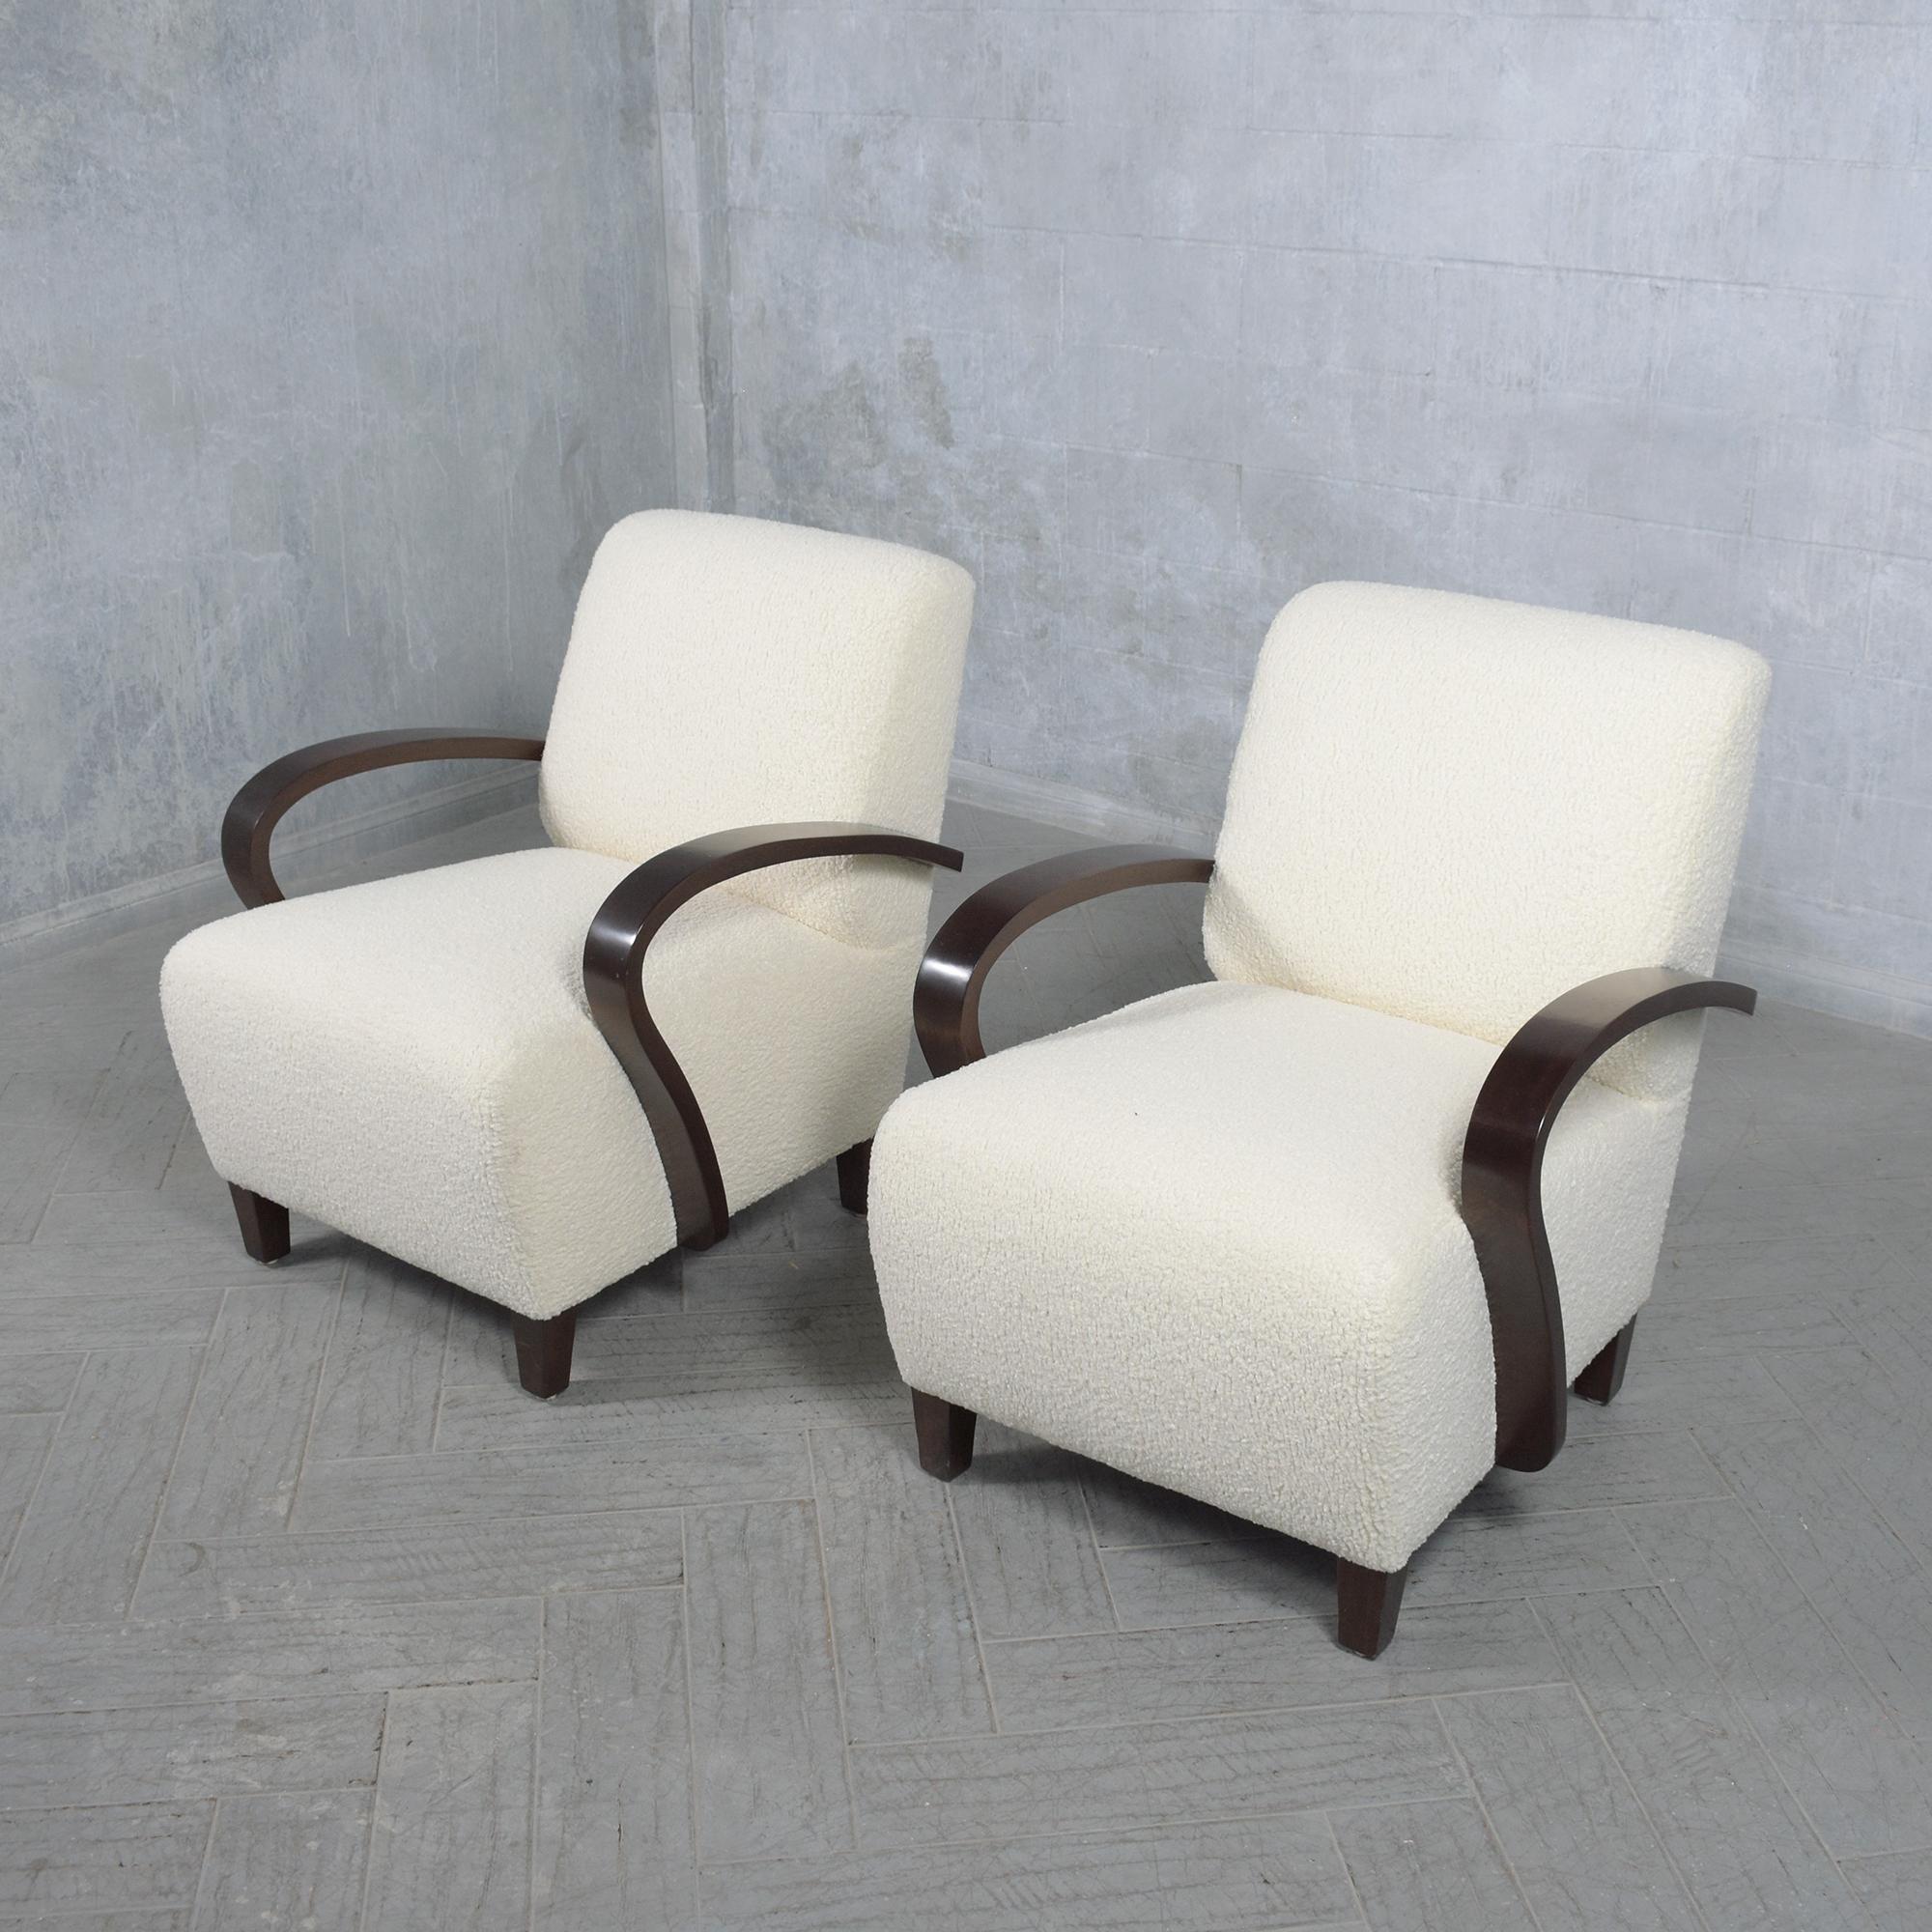 Stained Restored Mid-Century Modern Lounge Chairs: Timeless Style Meets Modern Comfort